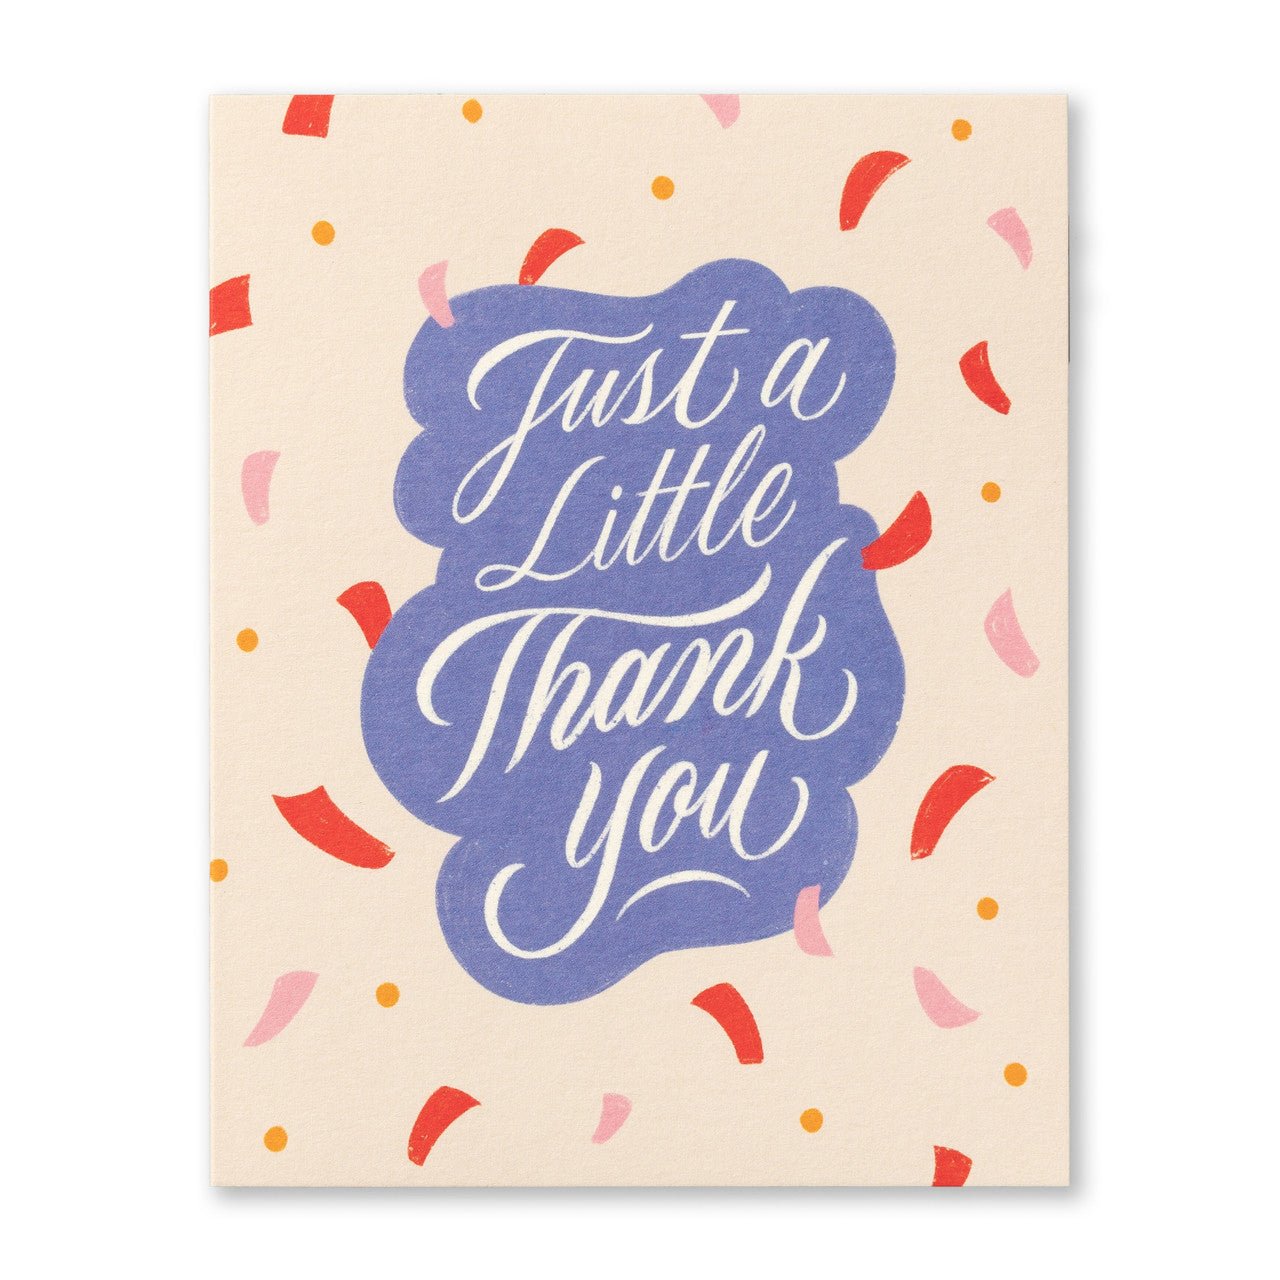 Love Muchly (TY) Thank You Card: Just A Little Thank You - My Filosophy